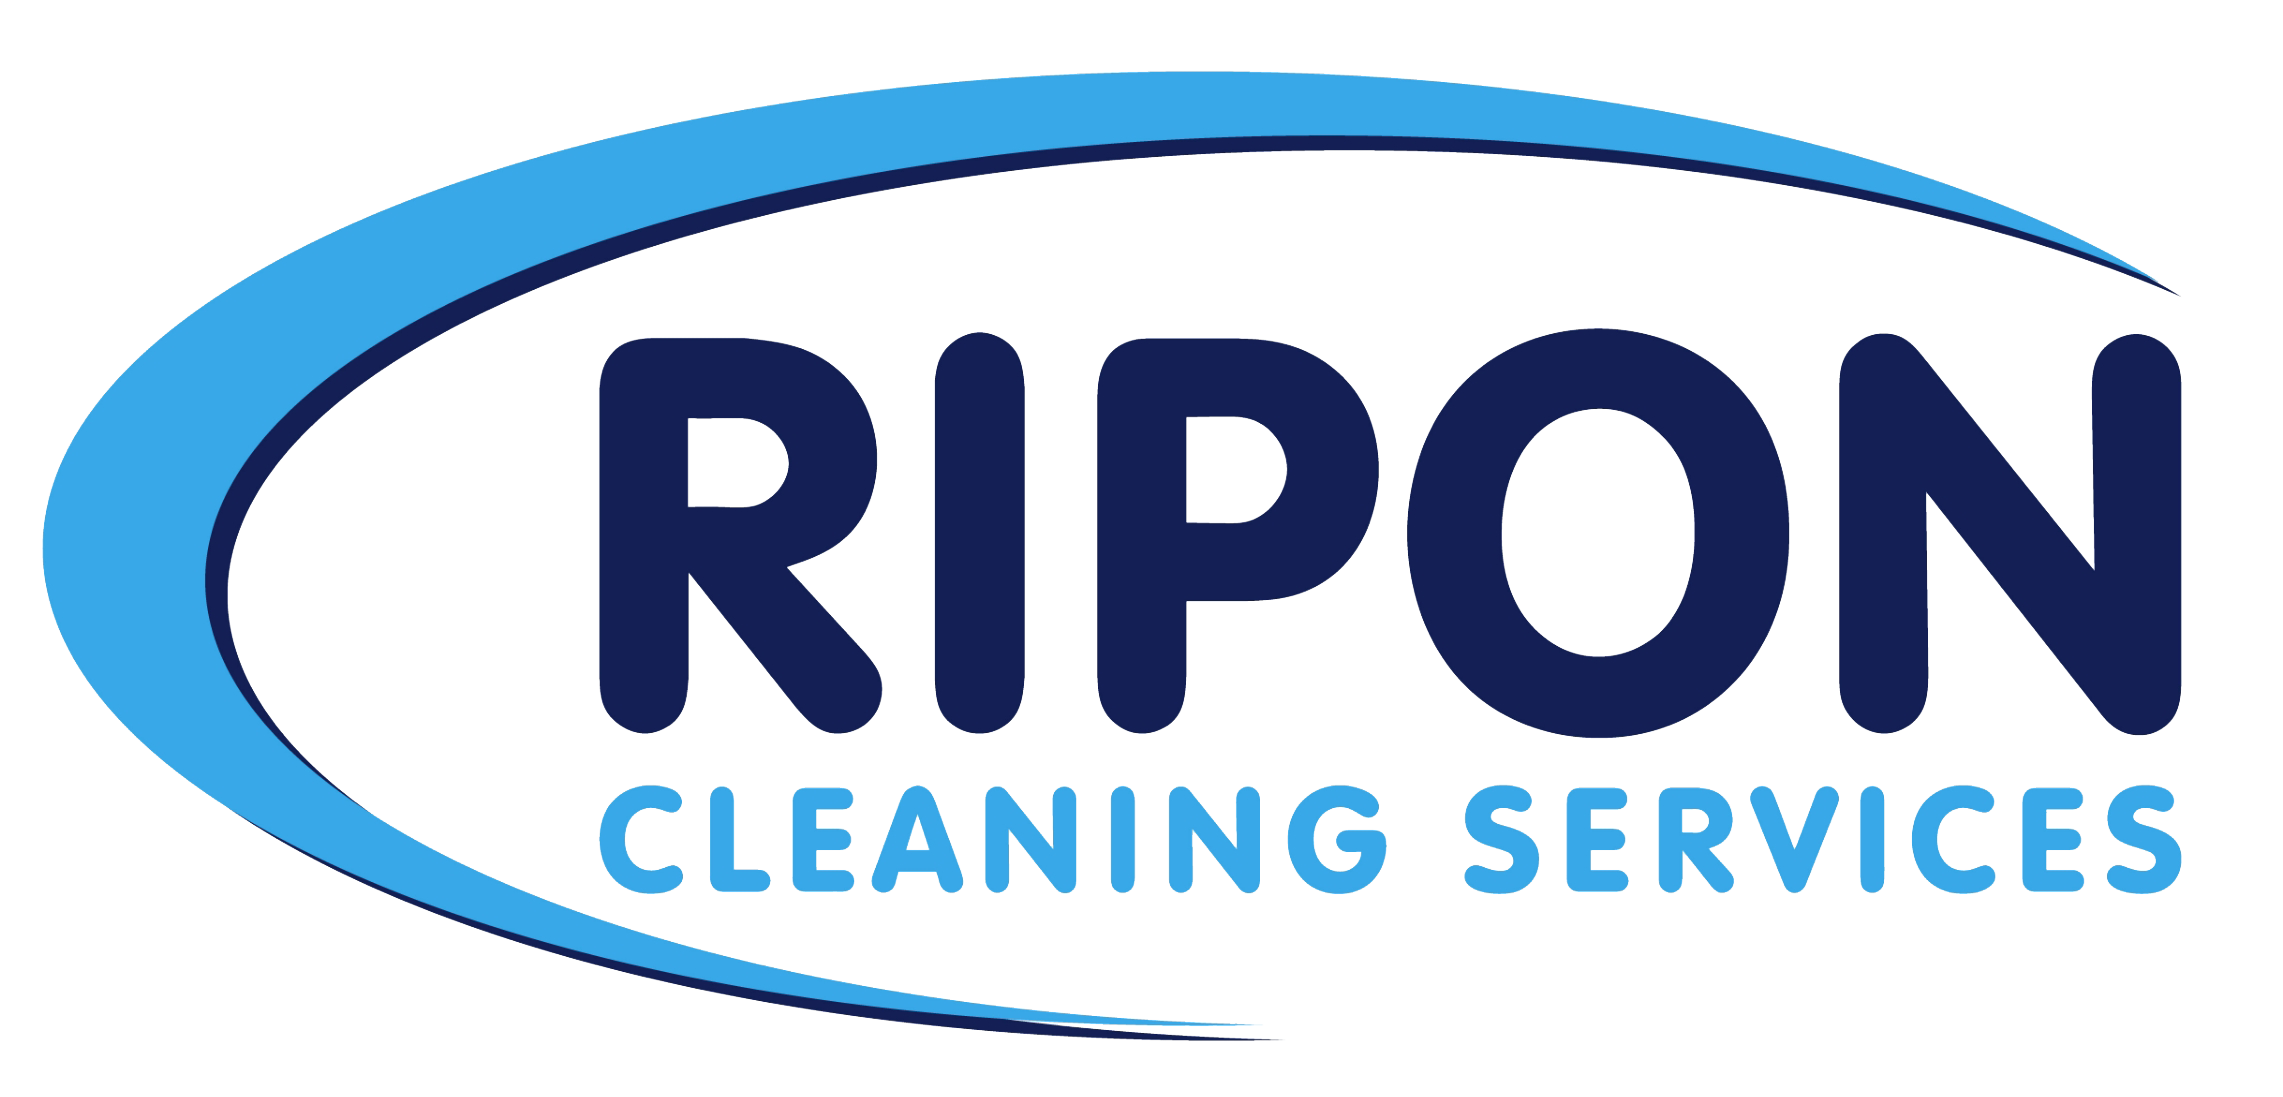 Ripon Cleaning Services